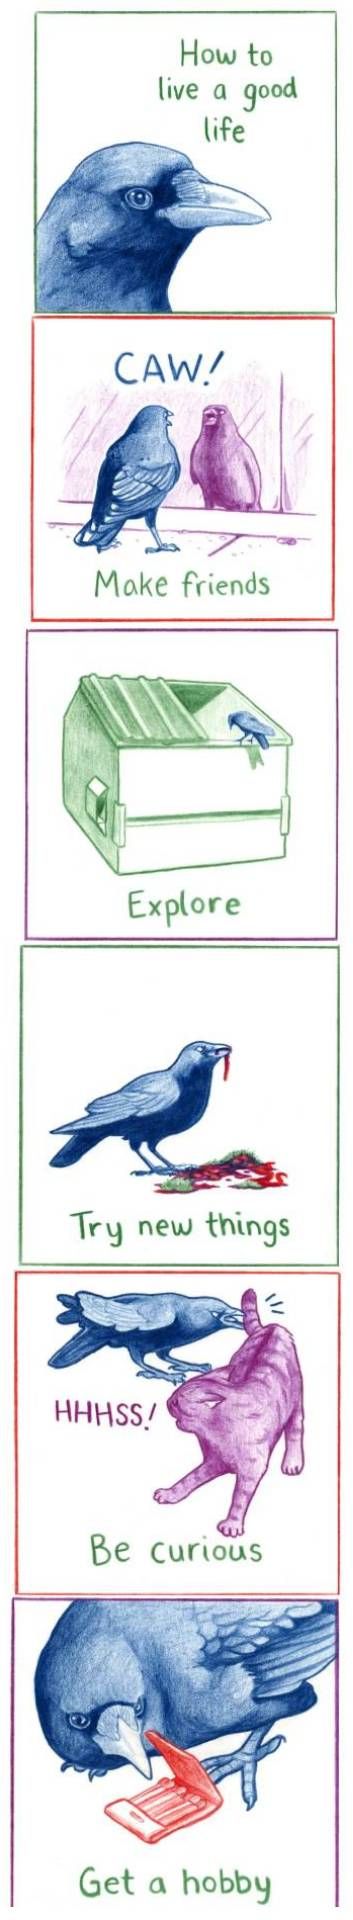 Life according to a crow